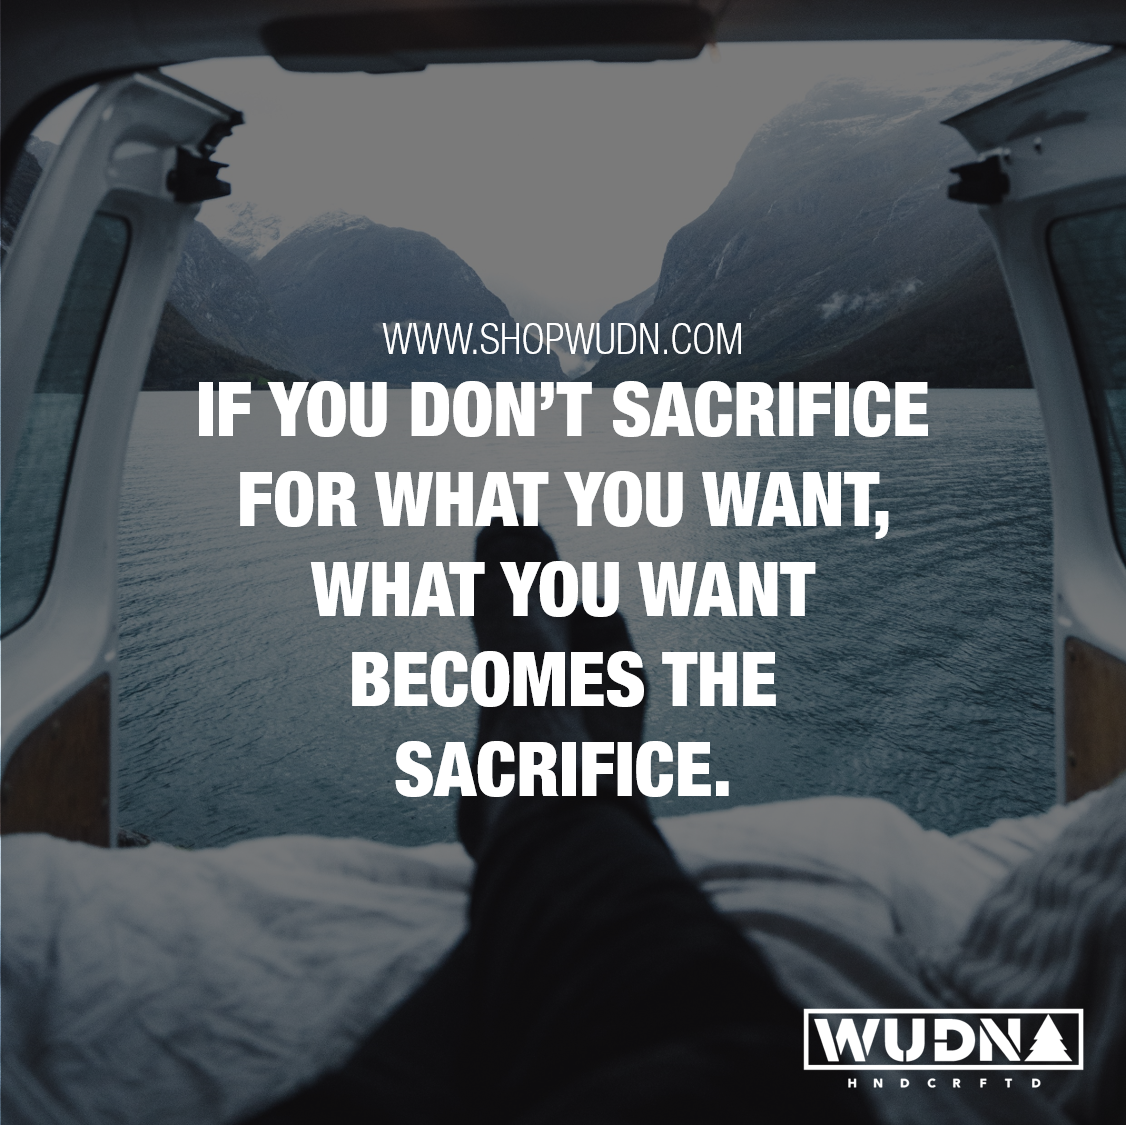 If you don't sacrifice for what you want, what you want becomes the sacrifice.